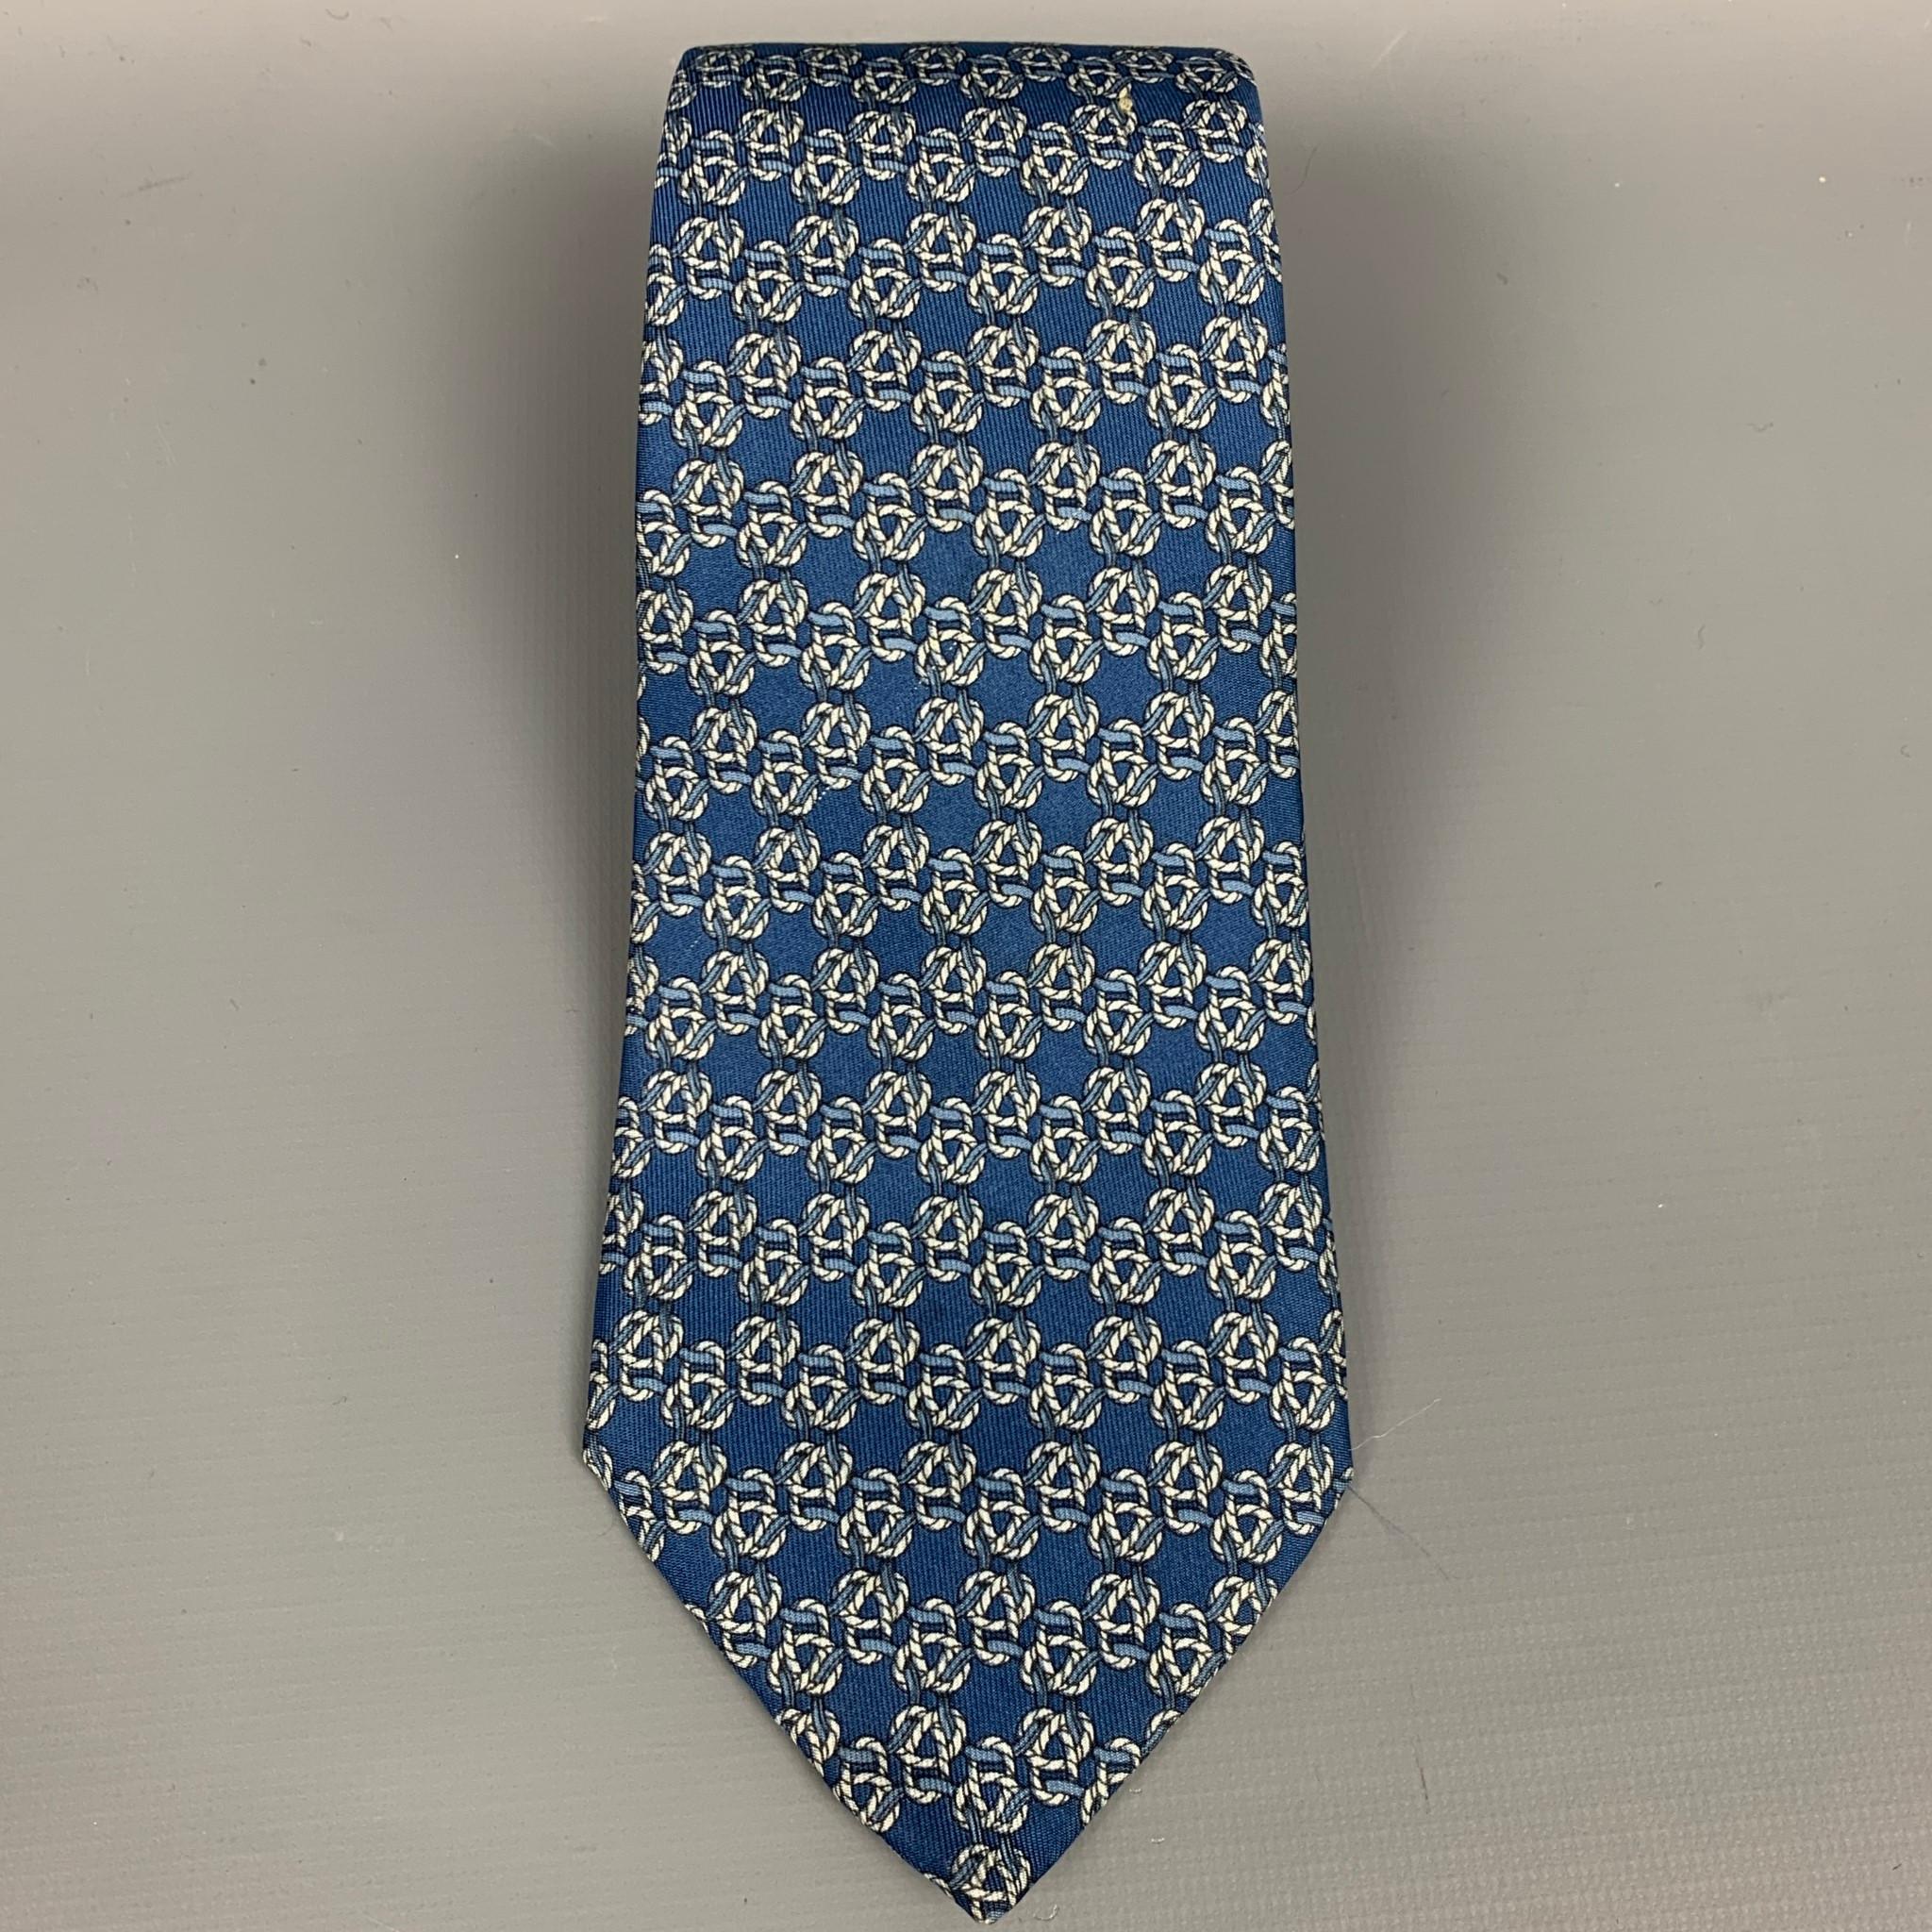 HERMES neck tie comes in a ble & cream kno print silk. Made in France.

Very Good Pre-Owned Condition.
Marked: 792 MA

Measurements:

Width: 3.5 in.  